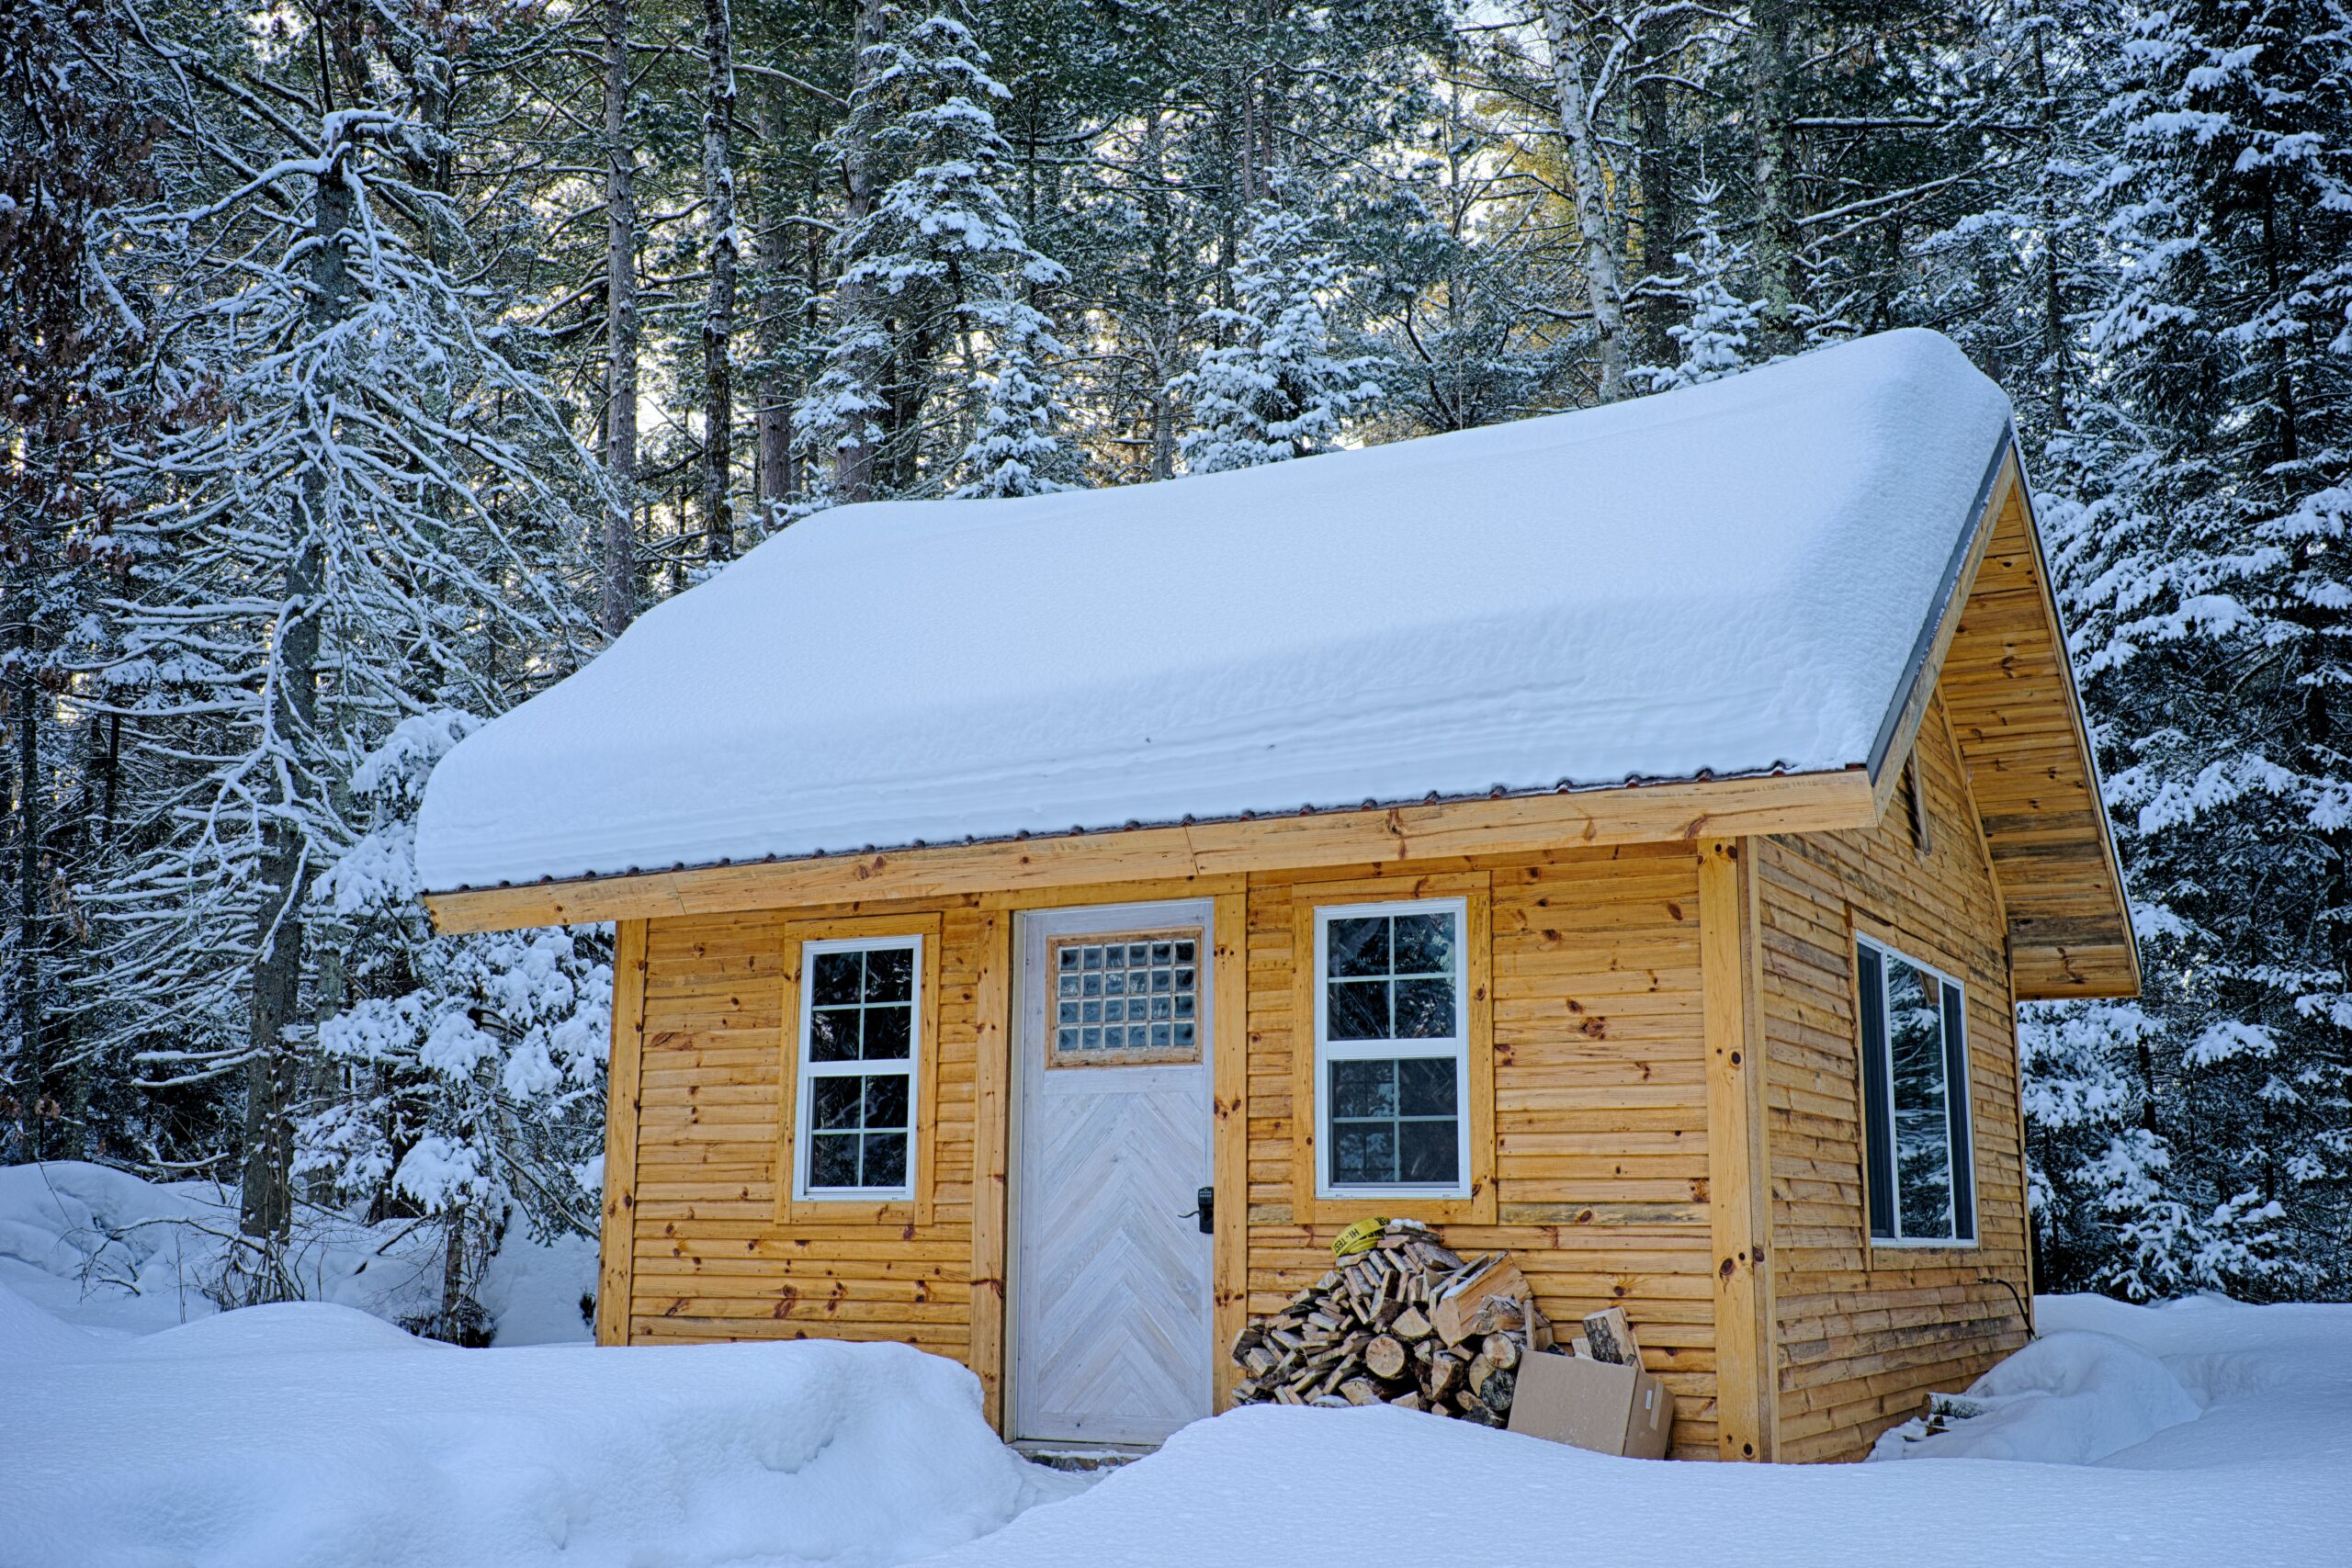 snow-covered wooden house inside the forest